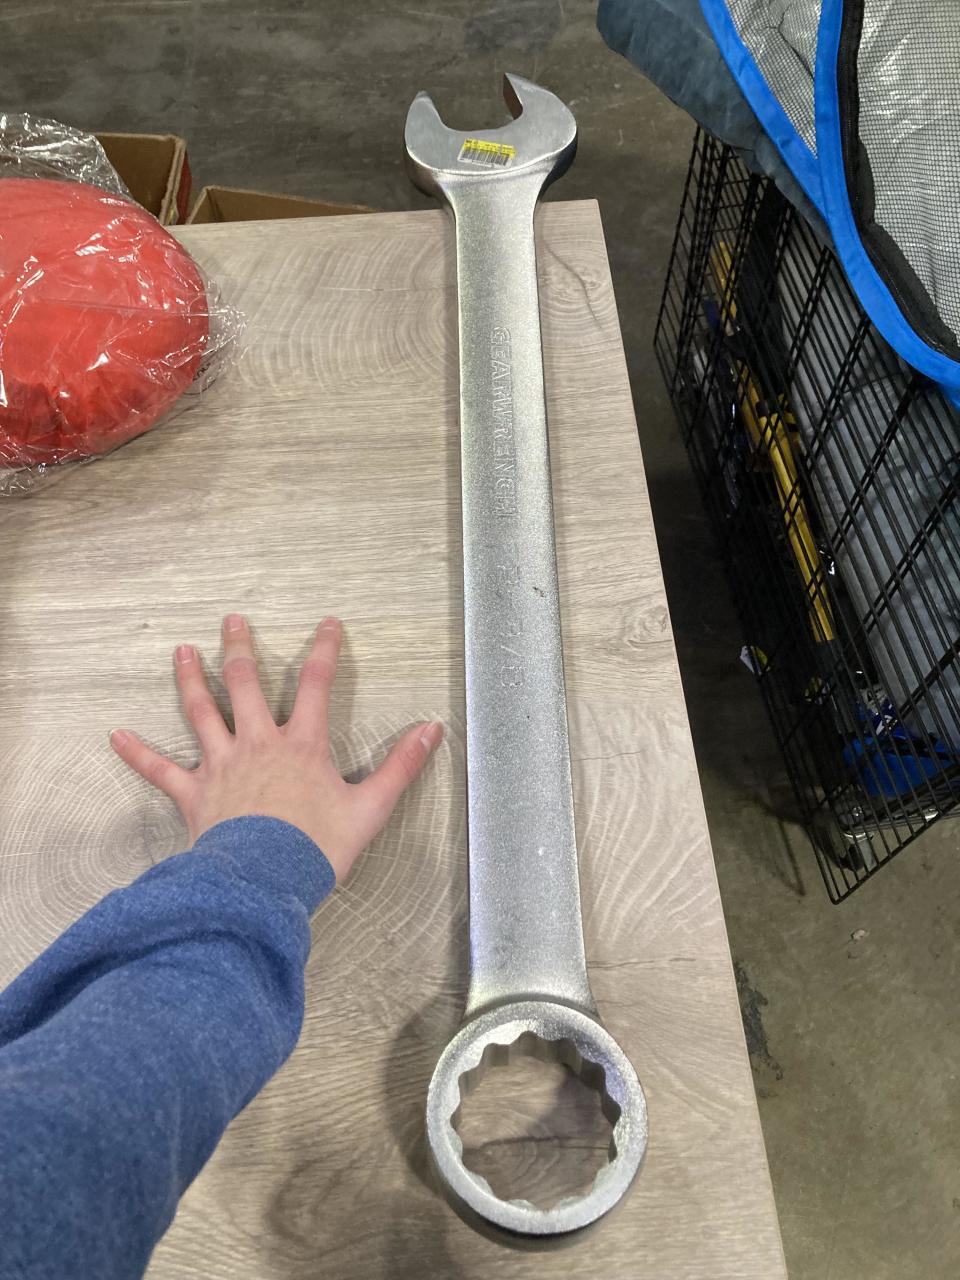 A giant wrench about twice as long as a person's arm next to it